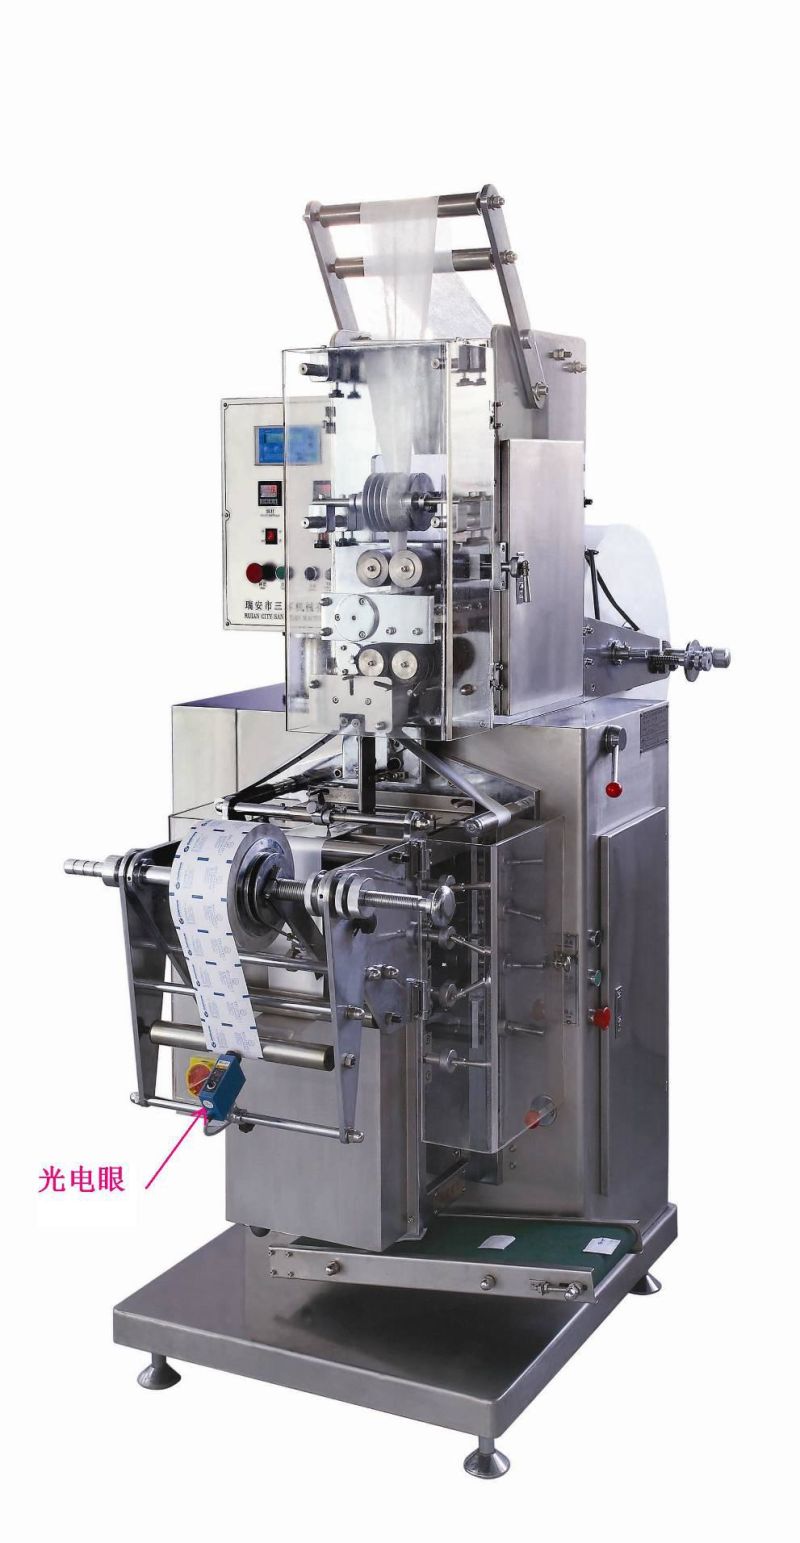 Zjb Series Vertical Automatic Wet Tissue Package Machine for Sale at Home